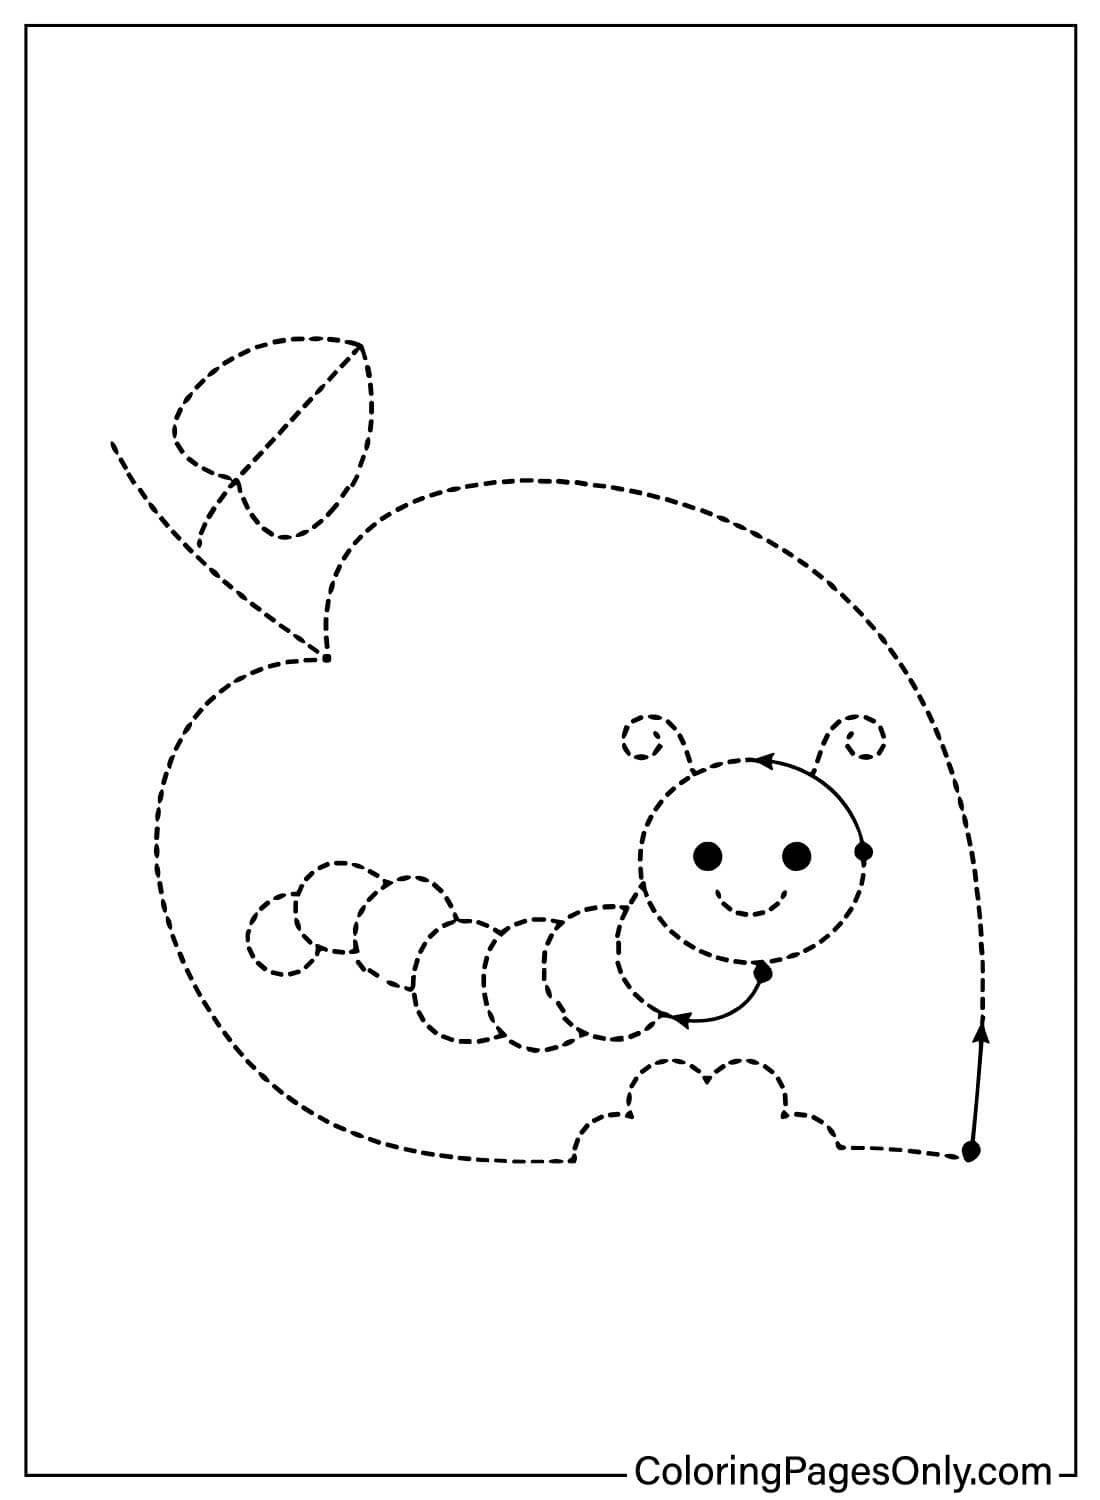 Caterpillar Tracing Coloring from Tracing